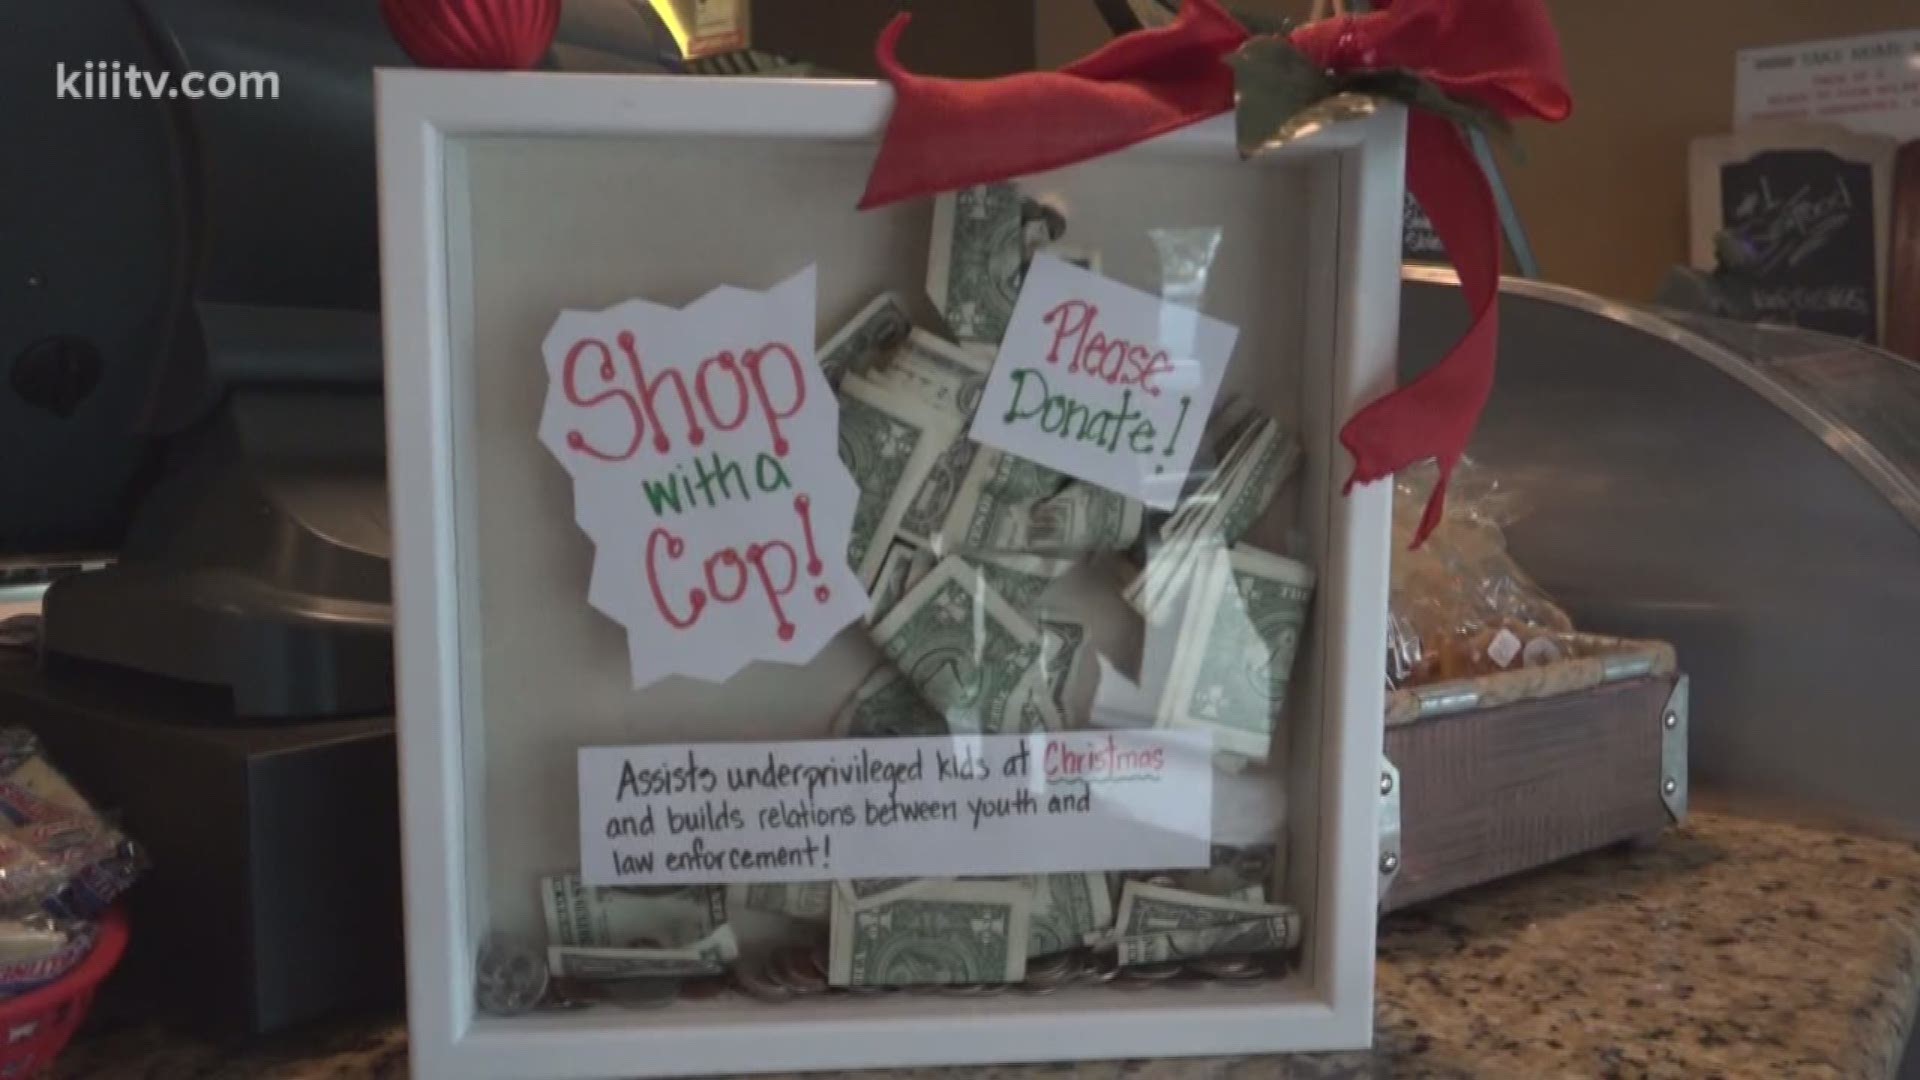 The annual Shop with a Cop program is about $15,000 short of their goal for 2018.